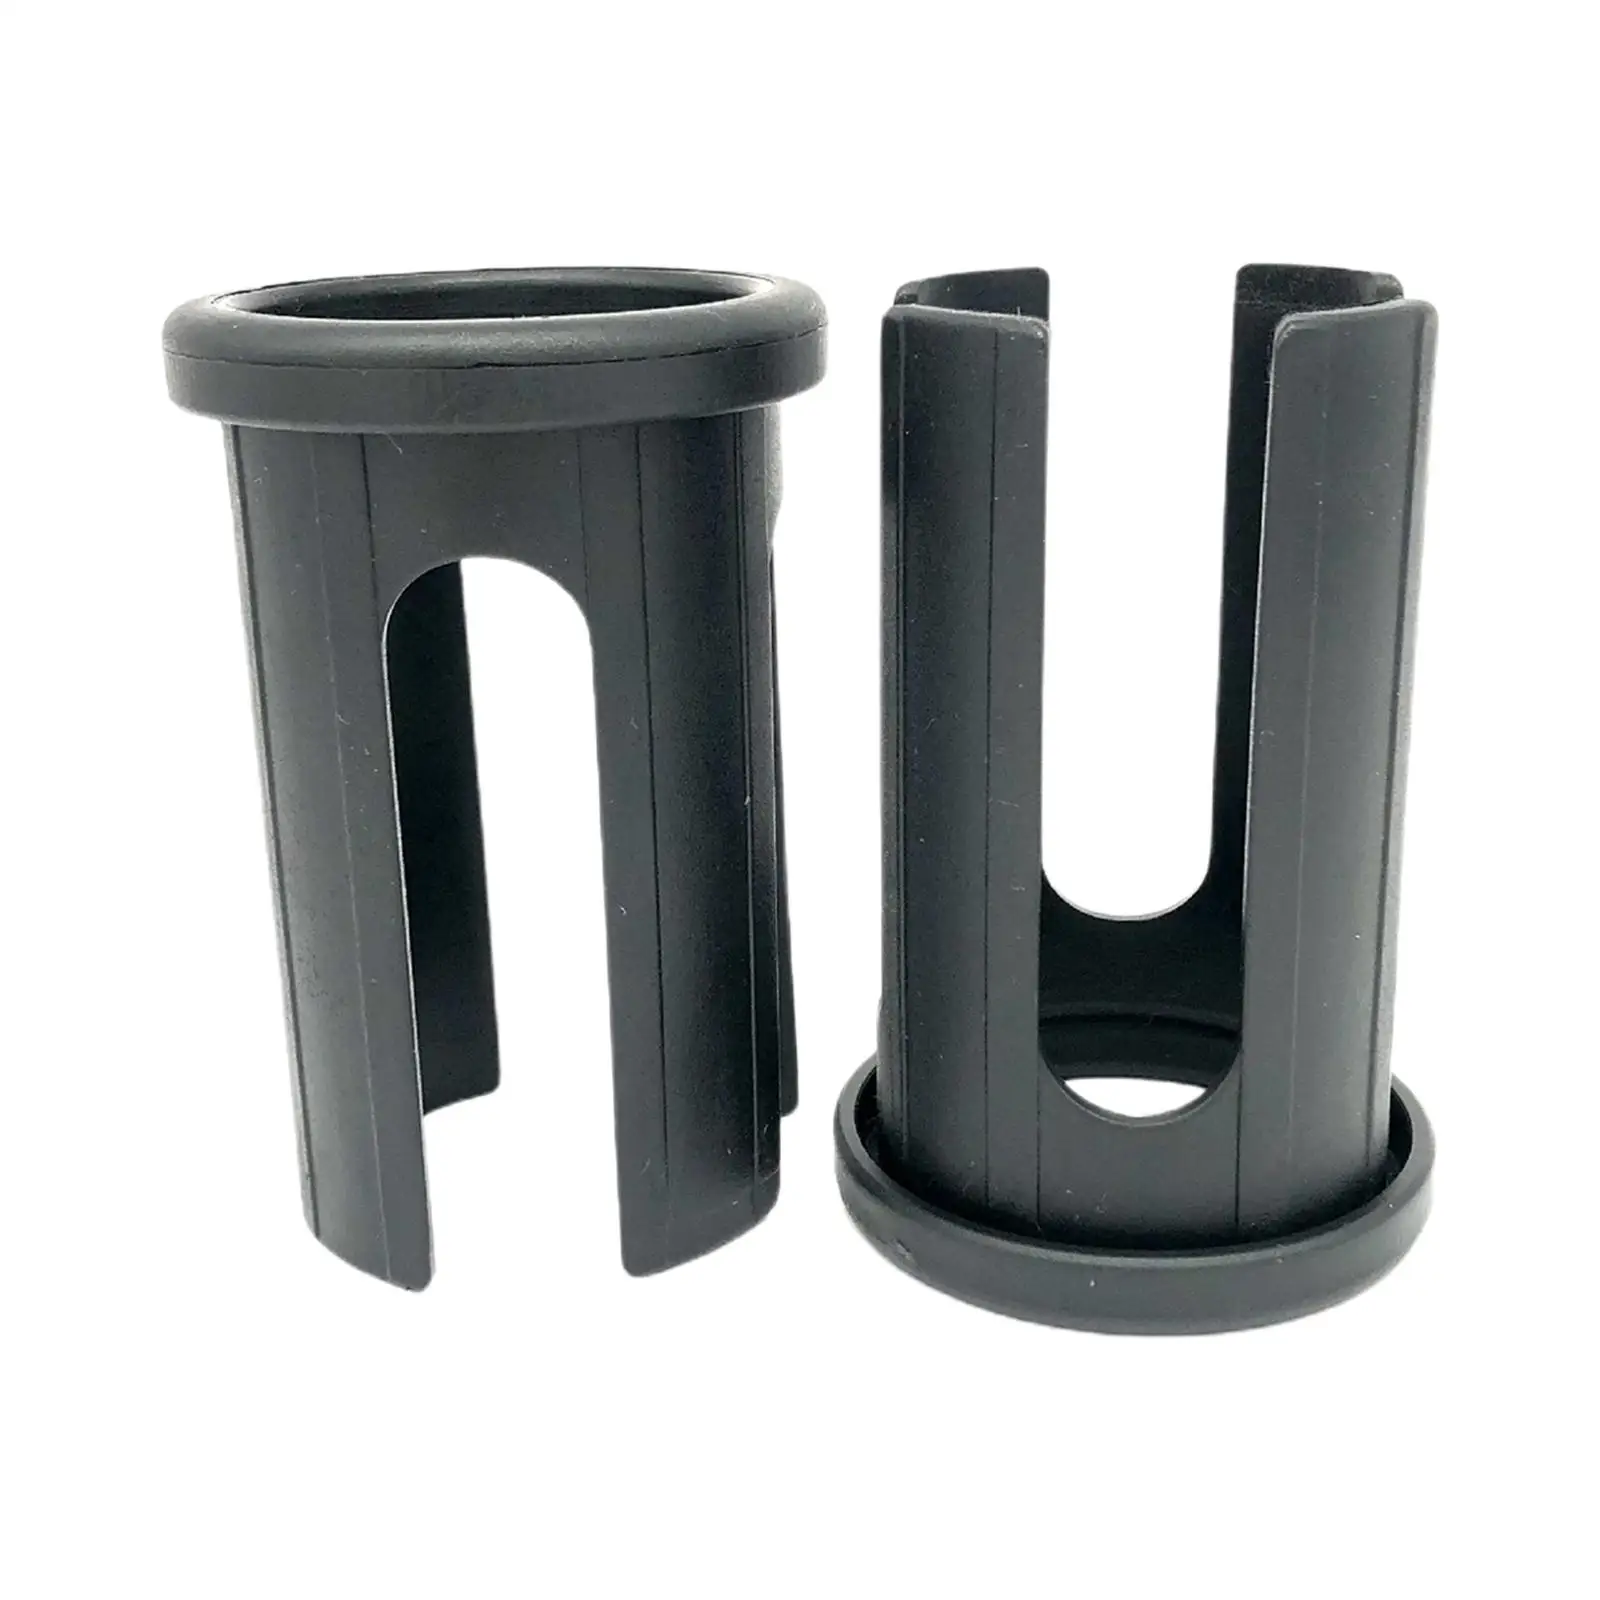 Adapter Sleeve Supports Convert Weight Posts for Strength Training Equipment